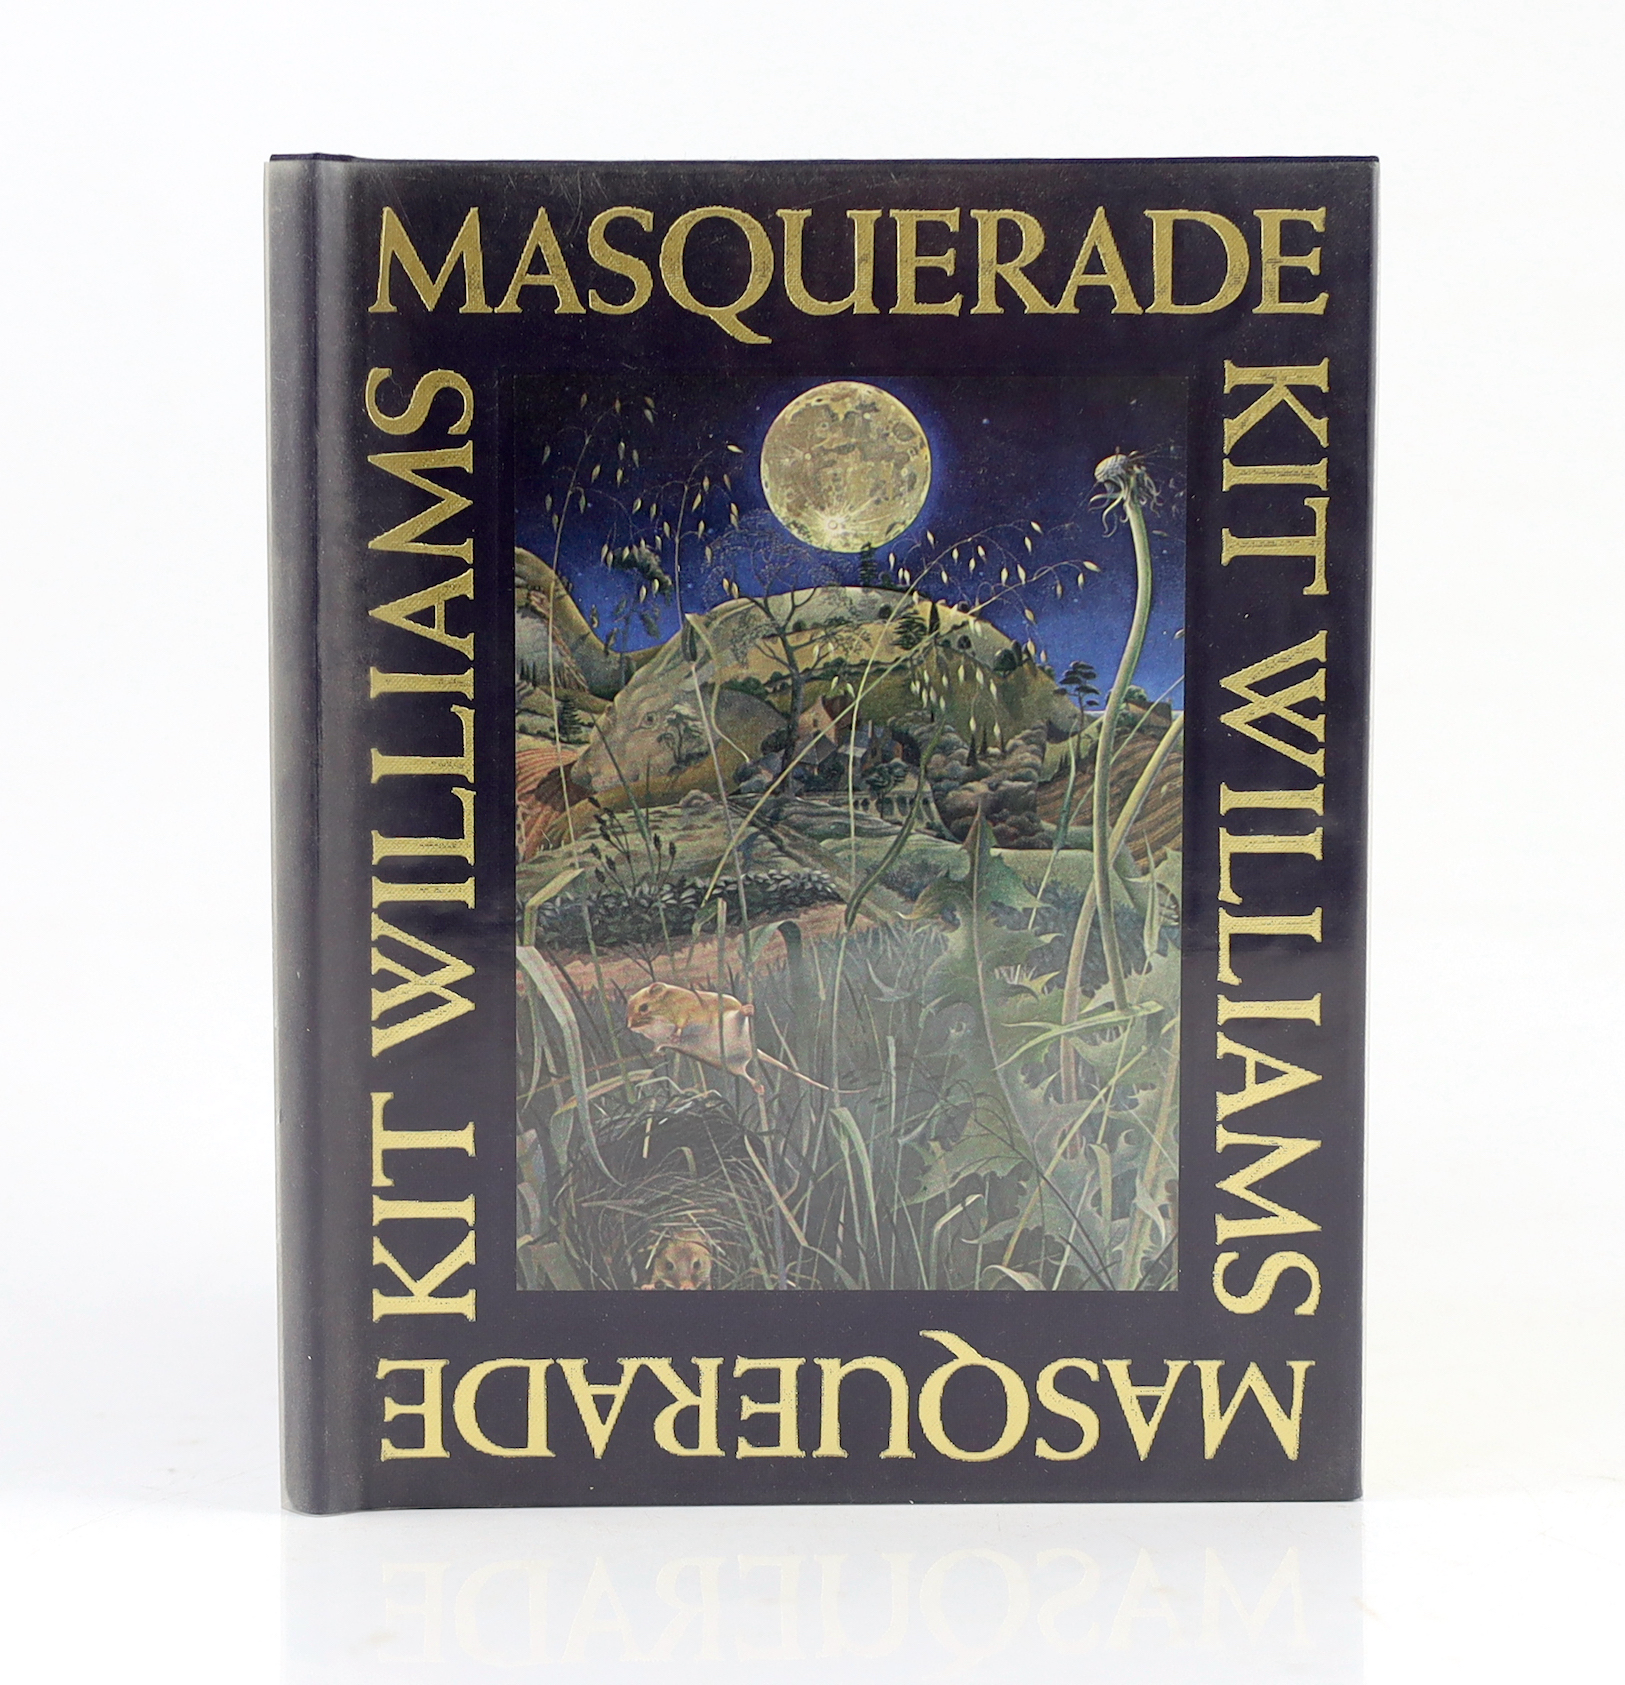 Williams, Kit. Masquerade. 1979. Number 141 of a limited edition of 1,000 copies signed by the author.